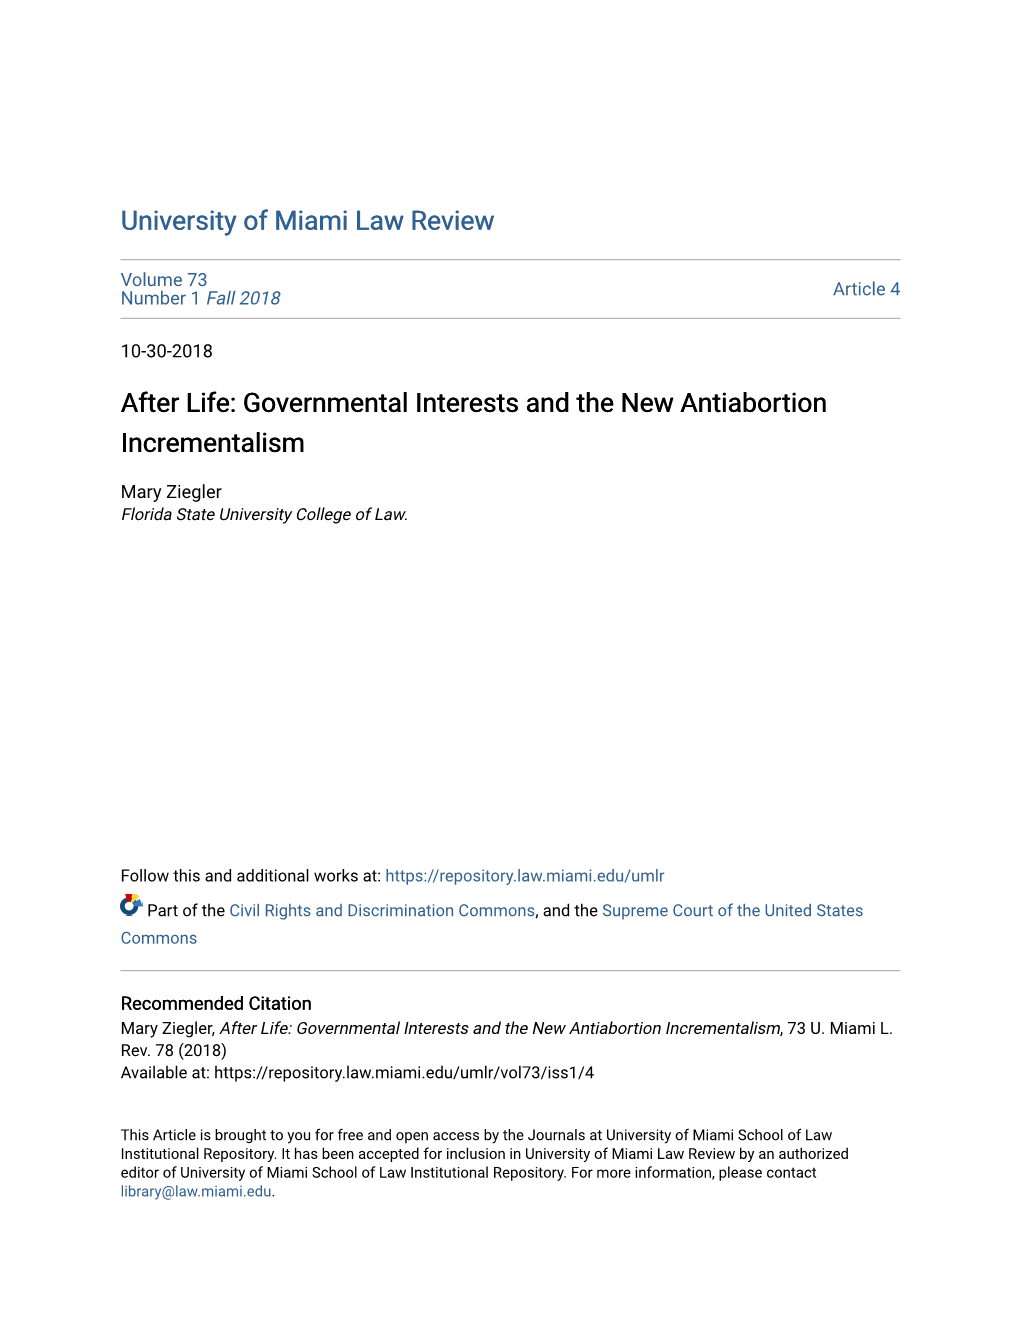 After Life: Governmental Interests and the New Antiabortion Incrementalism